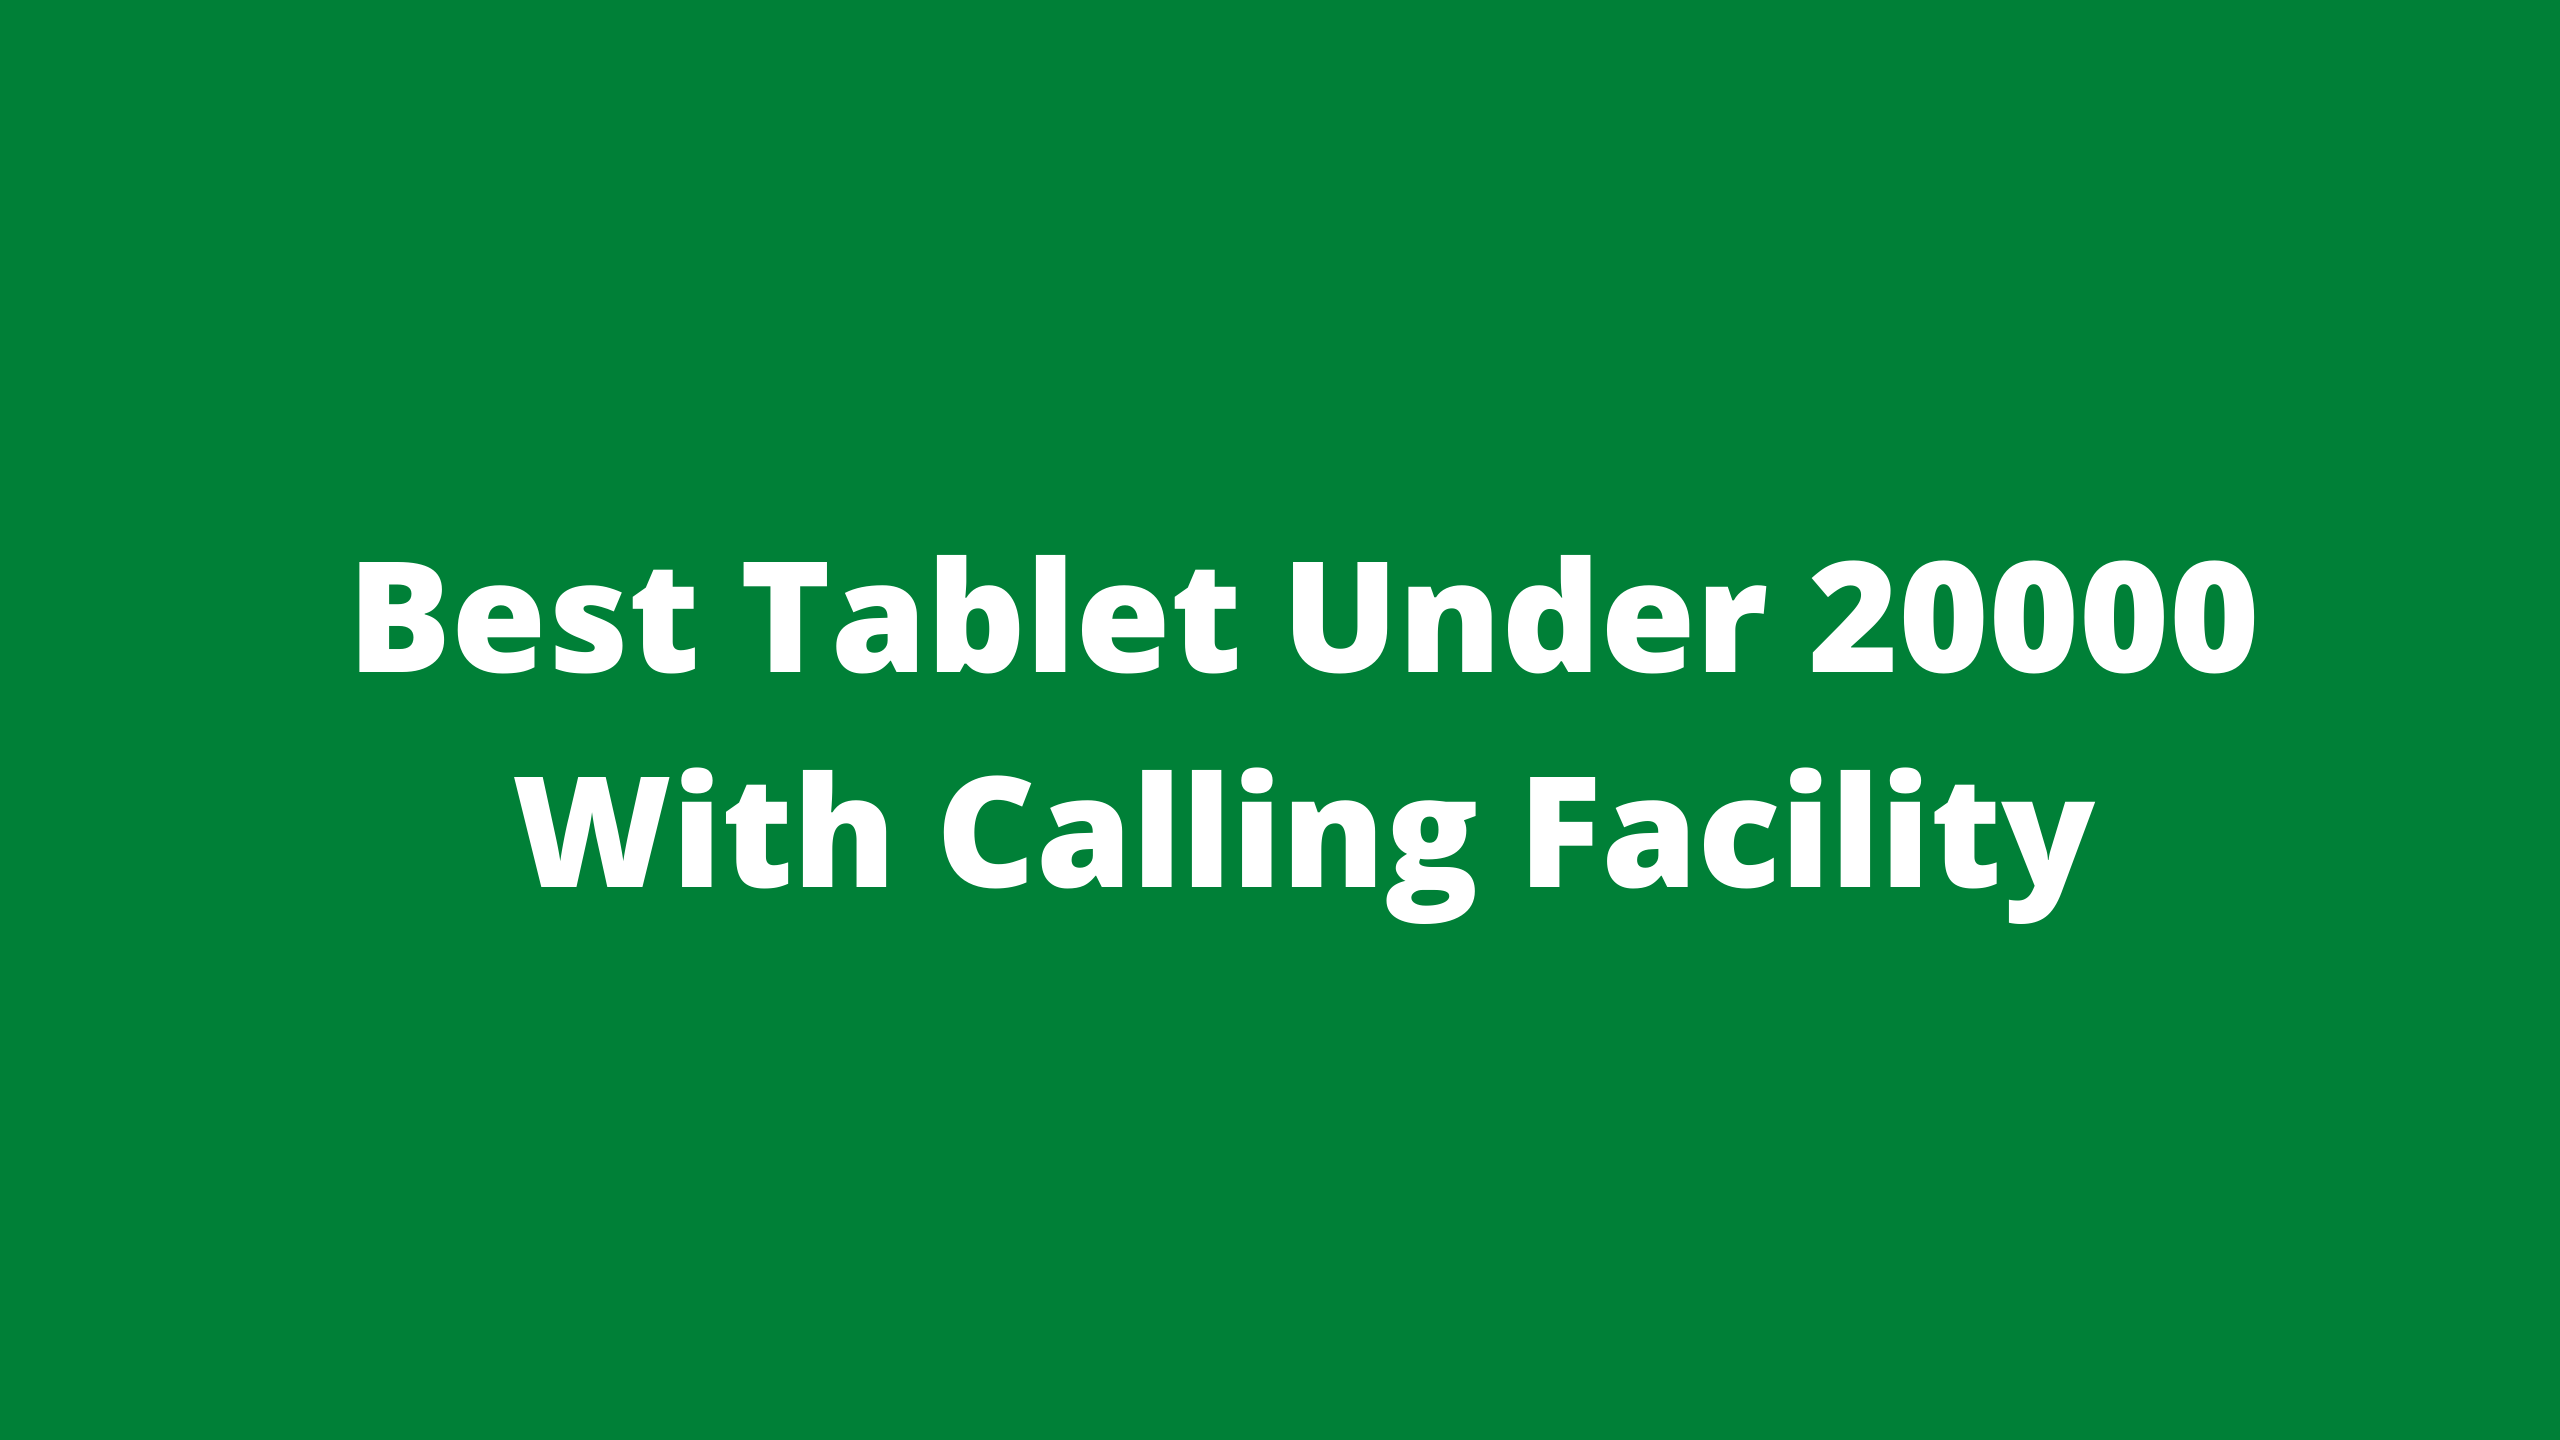 Best Tablet Under 20000 With Calling Facility